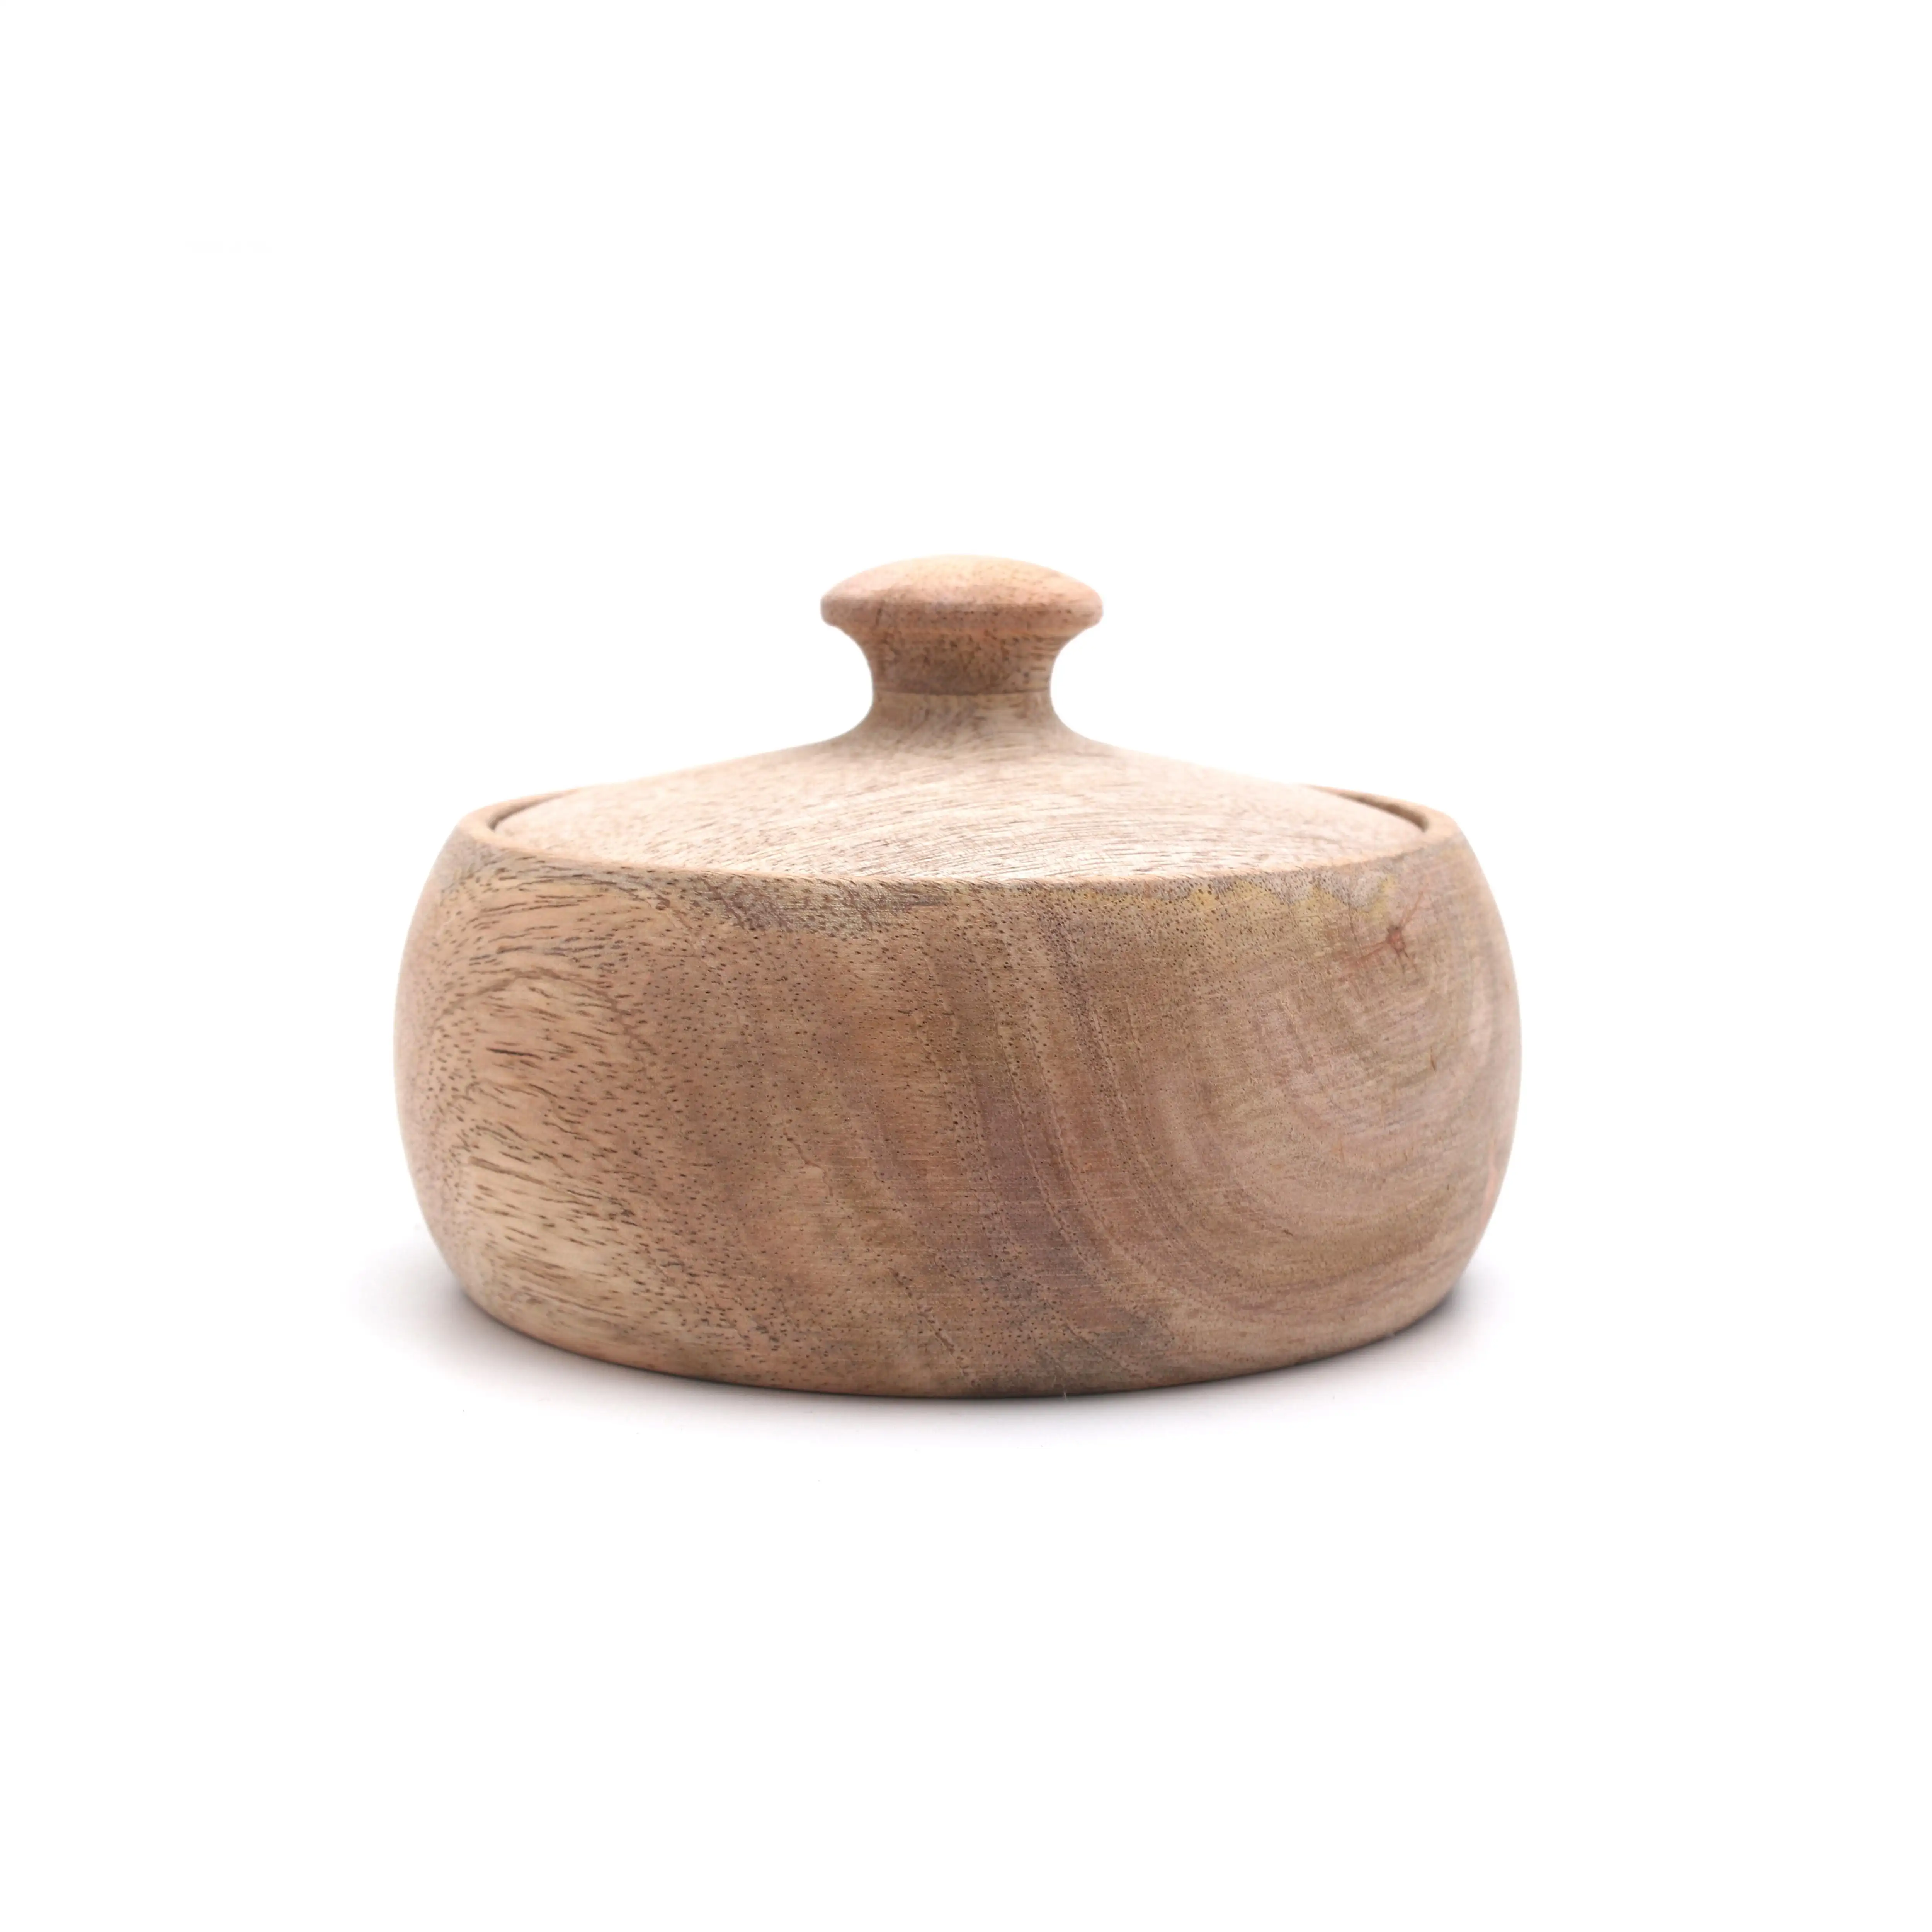 Natural Mango Wood Serving Bowl with Lid Handcrafted Wood Salt Sugar Spice Store Box Best Home Gift Mango Wooden Serving Bowl